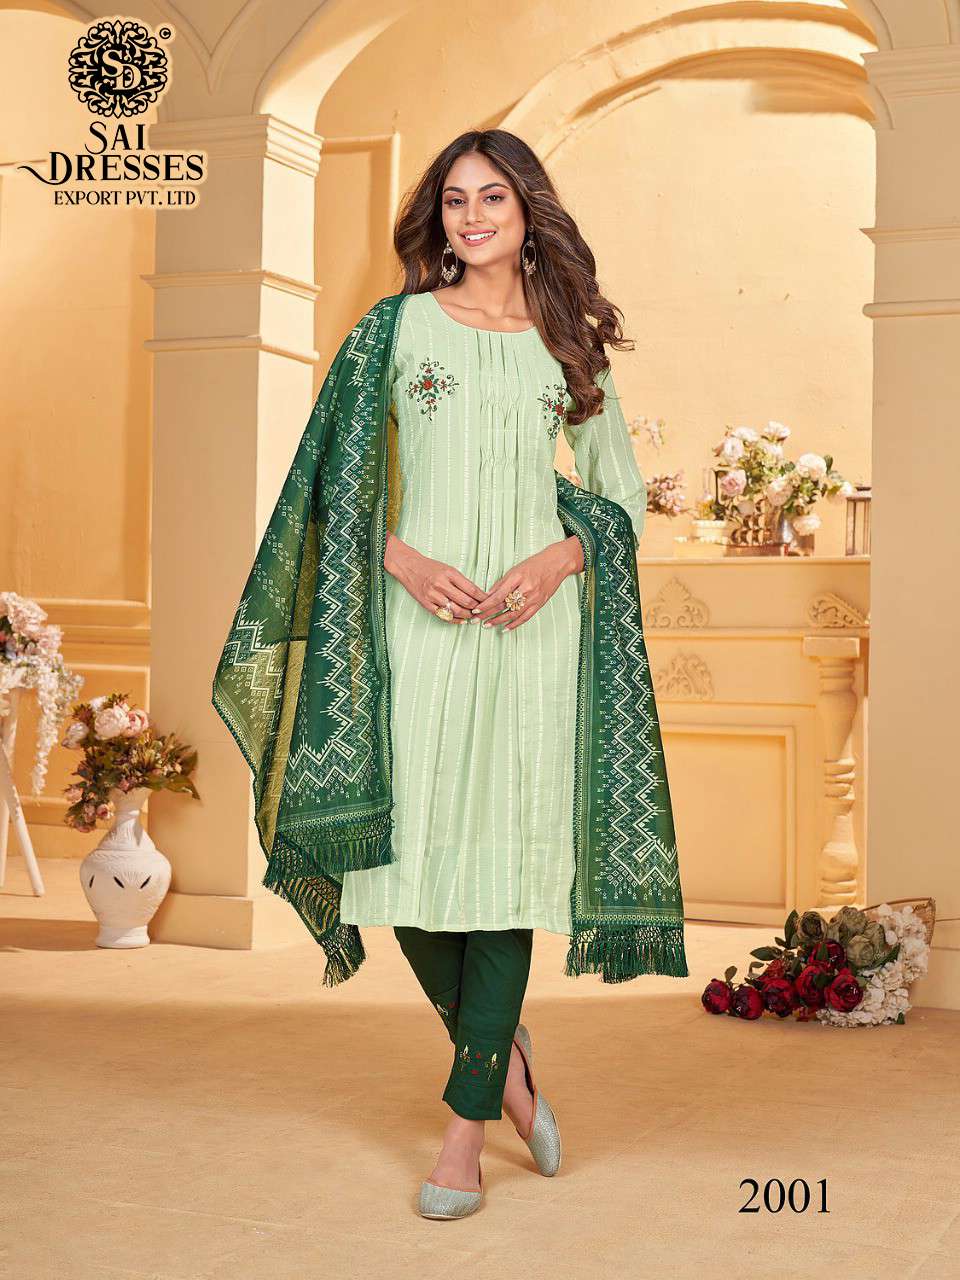 SAI DRESSES PRESENT SARGUN READY TO WEAR GEORGETTE WITH HAND WORK DESIGNER 3 PIECE SUITS IN WHOLESALE RATE IN SURAT